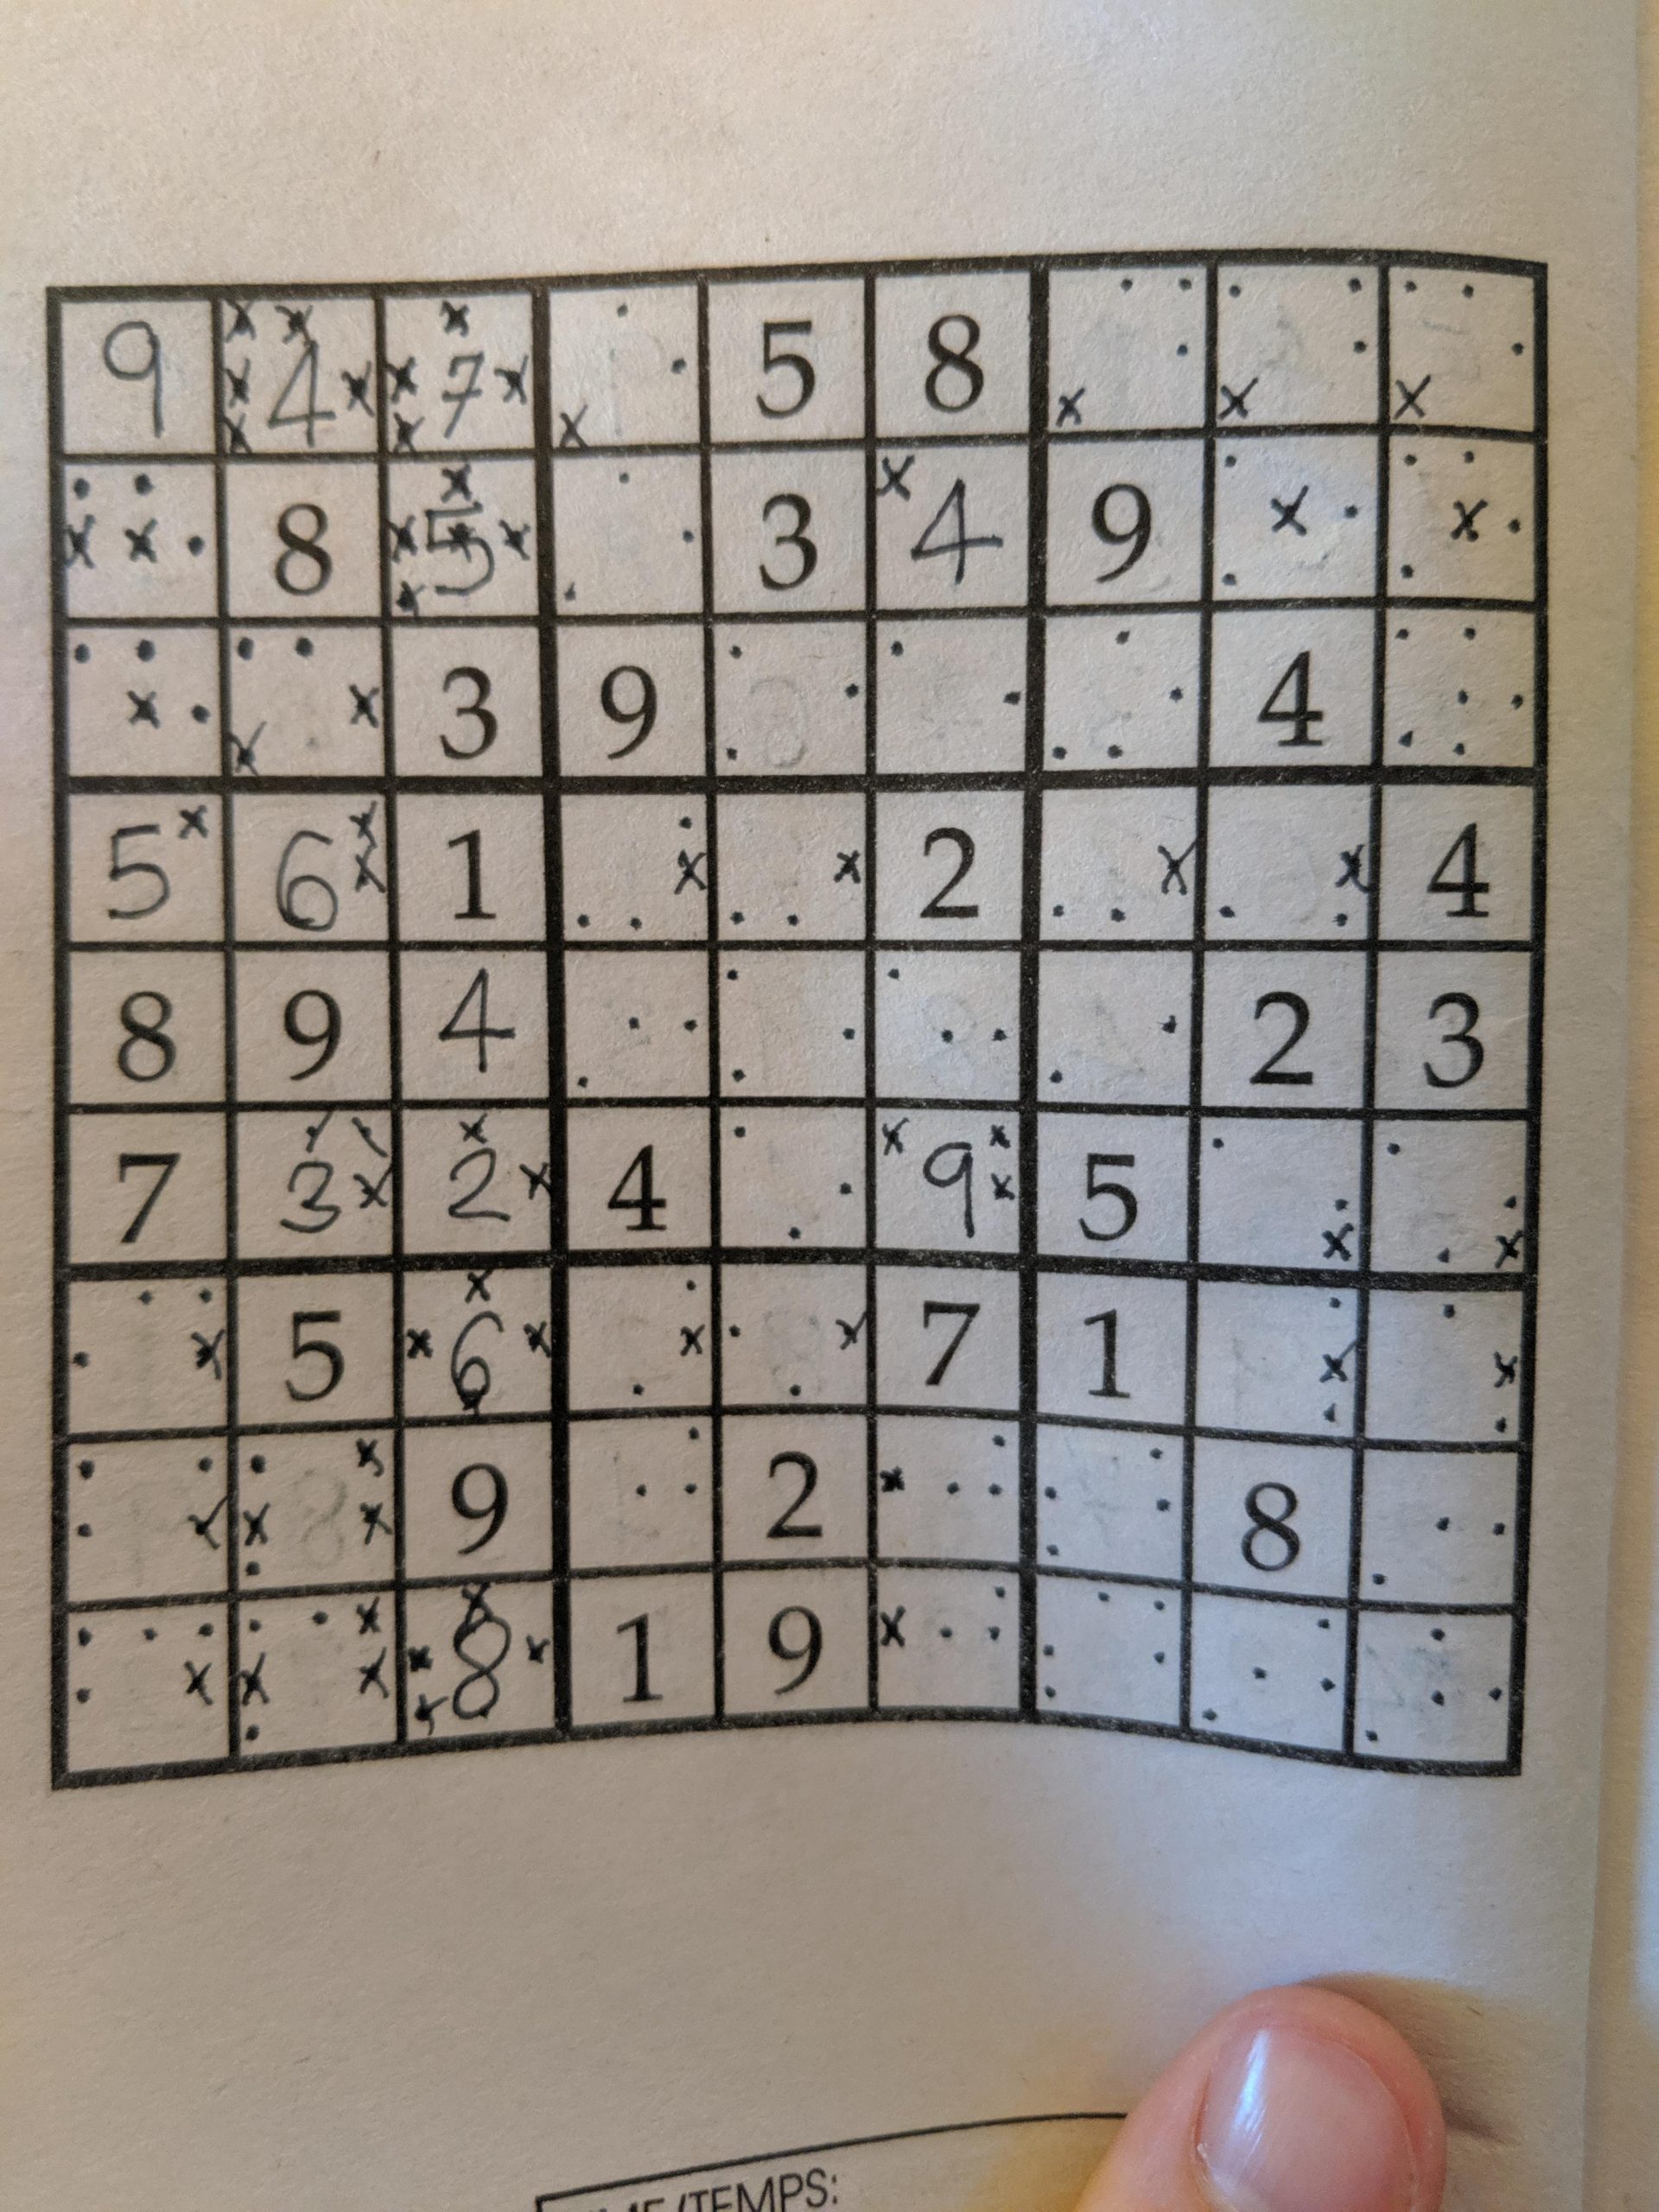 Need Help Learning Unique Rectangles : Sudoku